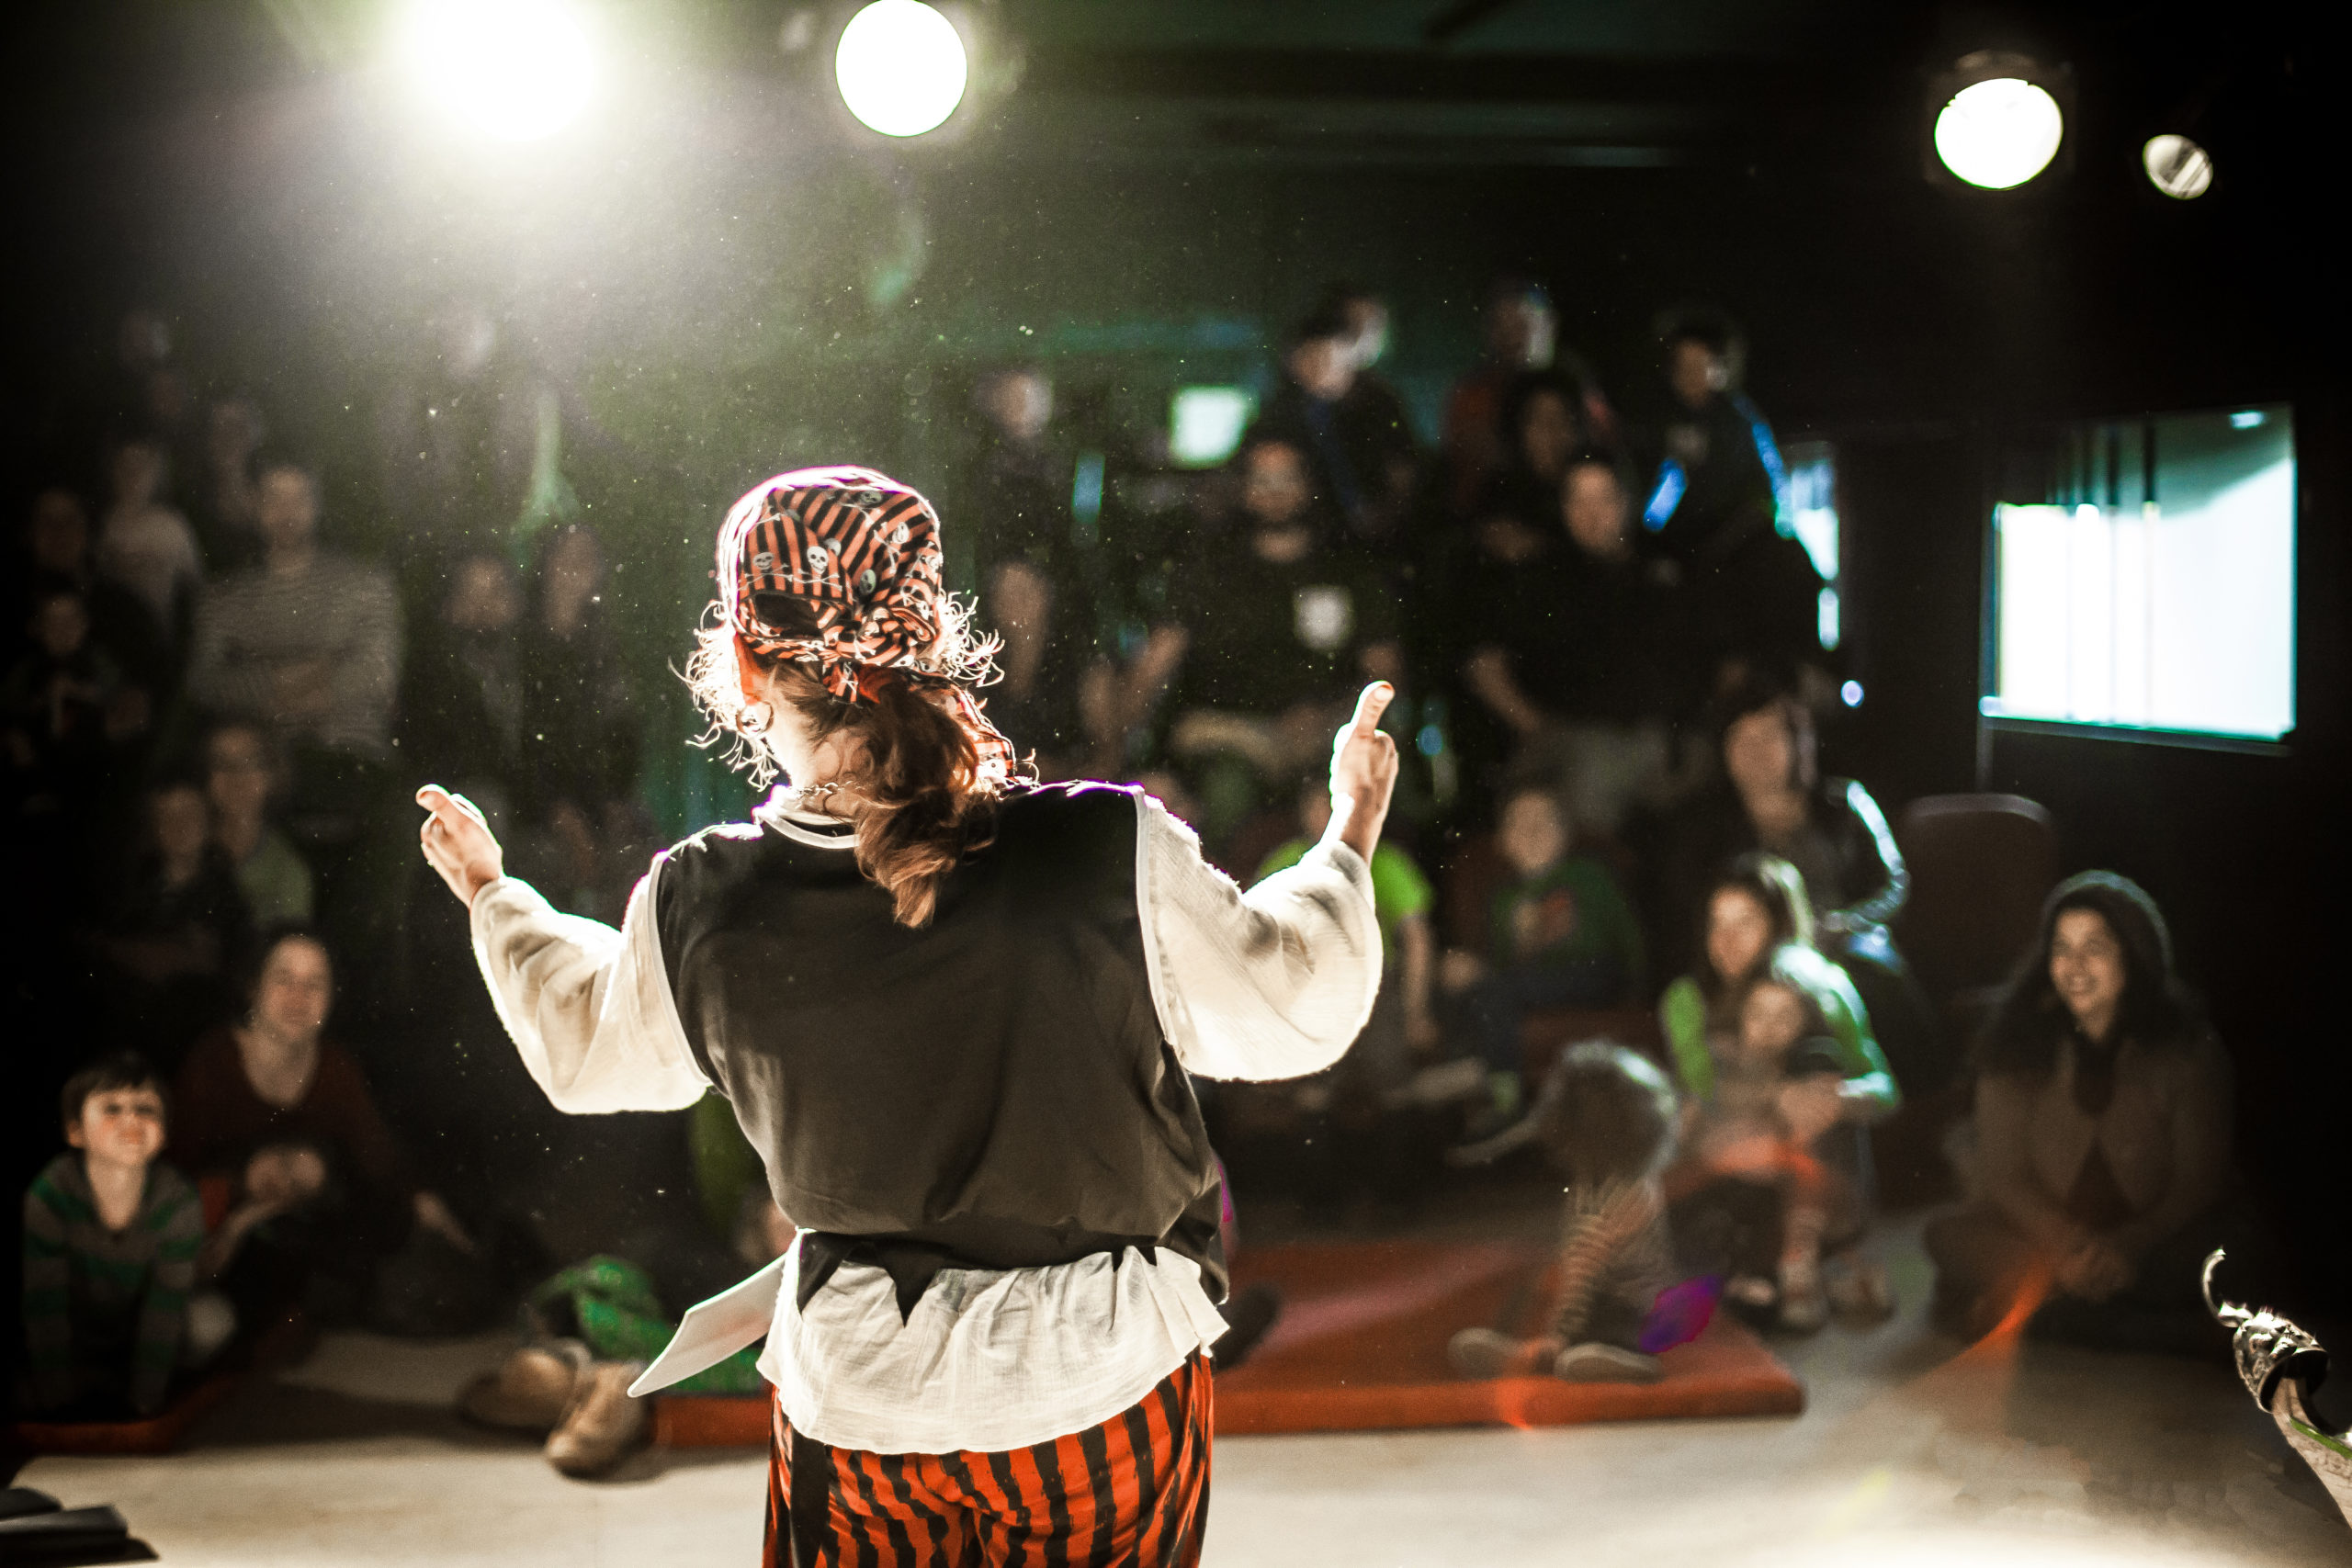 A performing arts entertainer is seen from the back in selective focus, dressed as a pirate on stage during a comedy act with blurry audience at back.